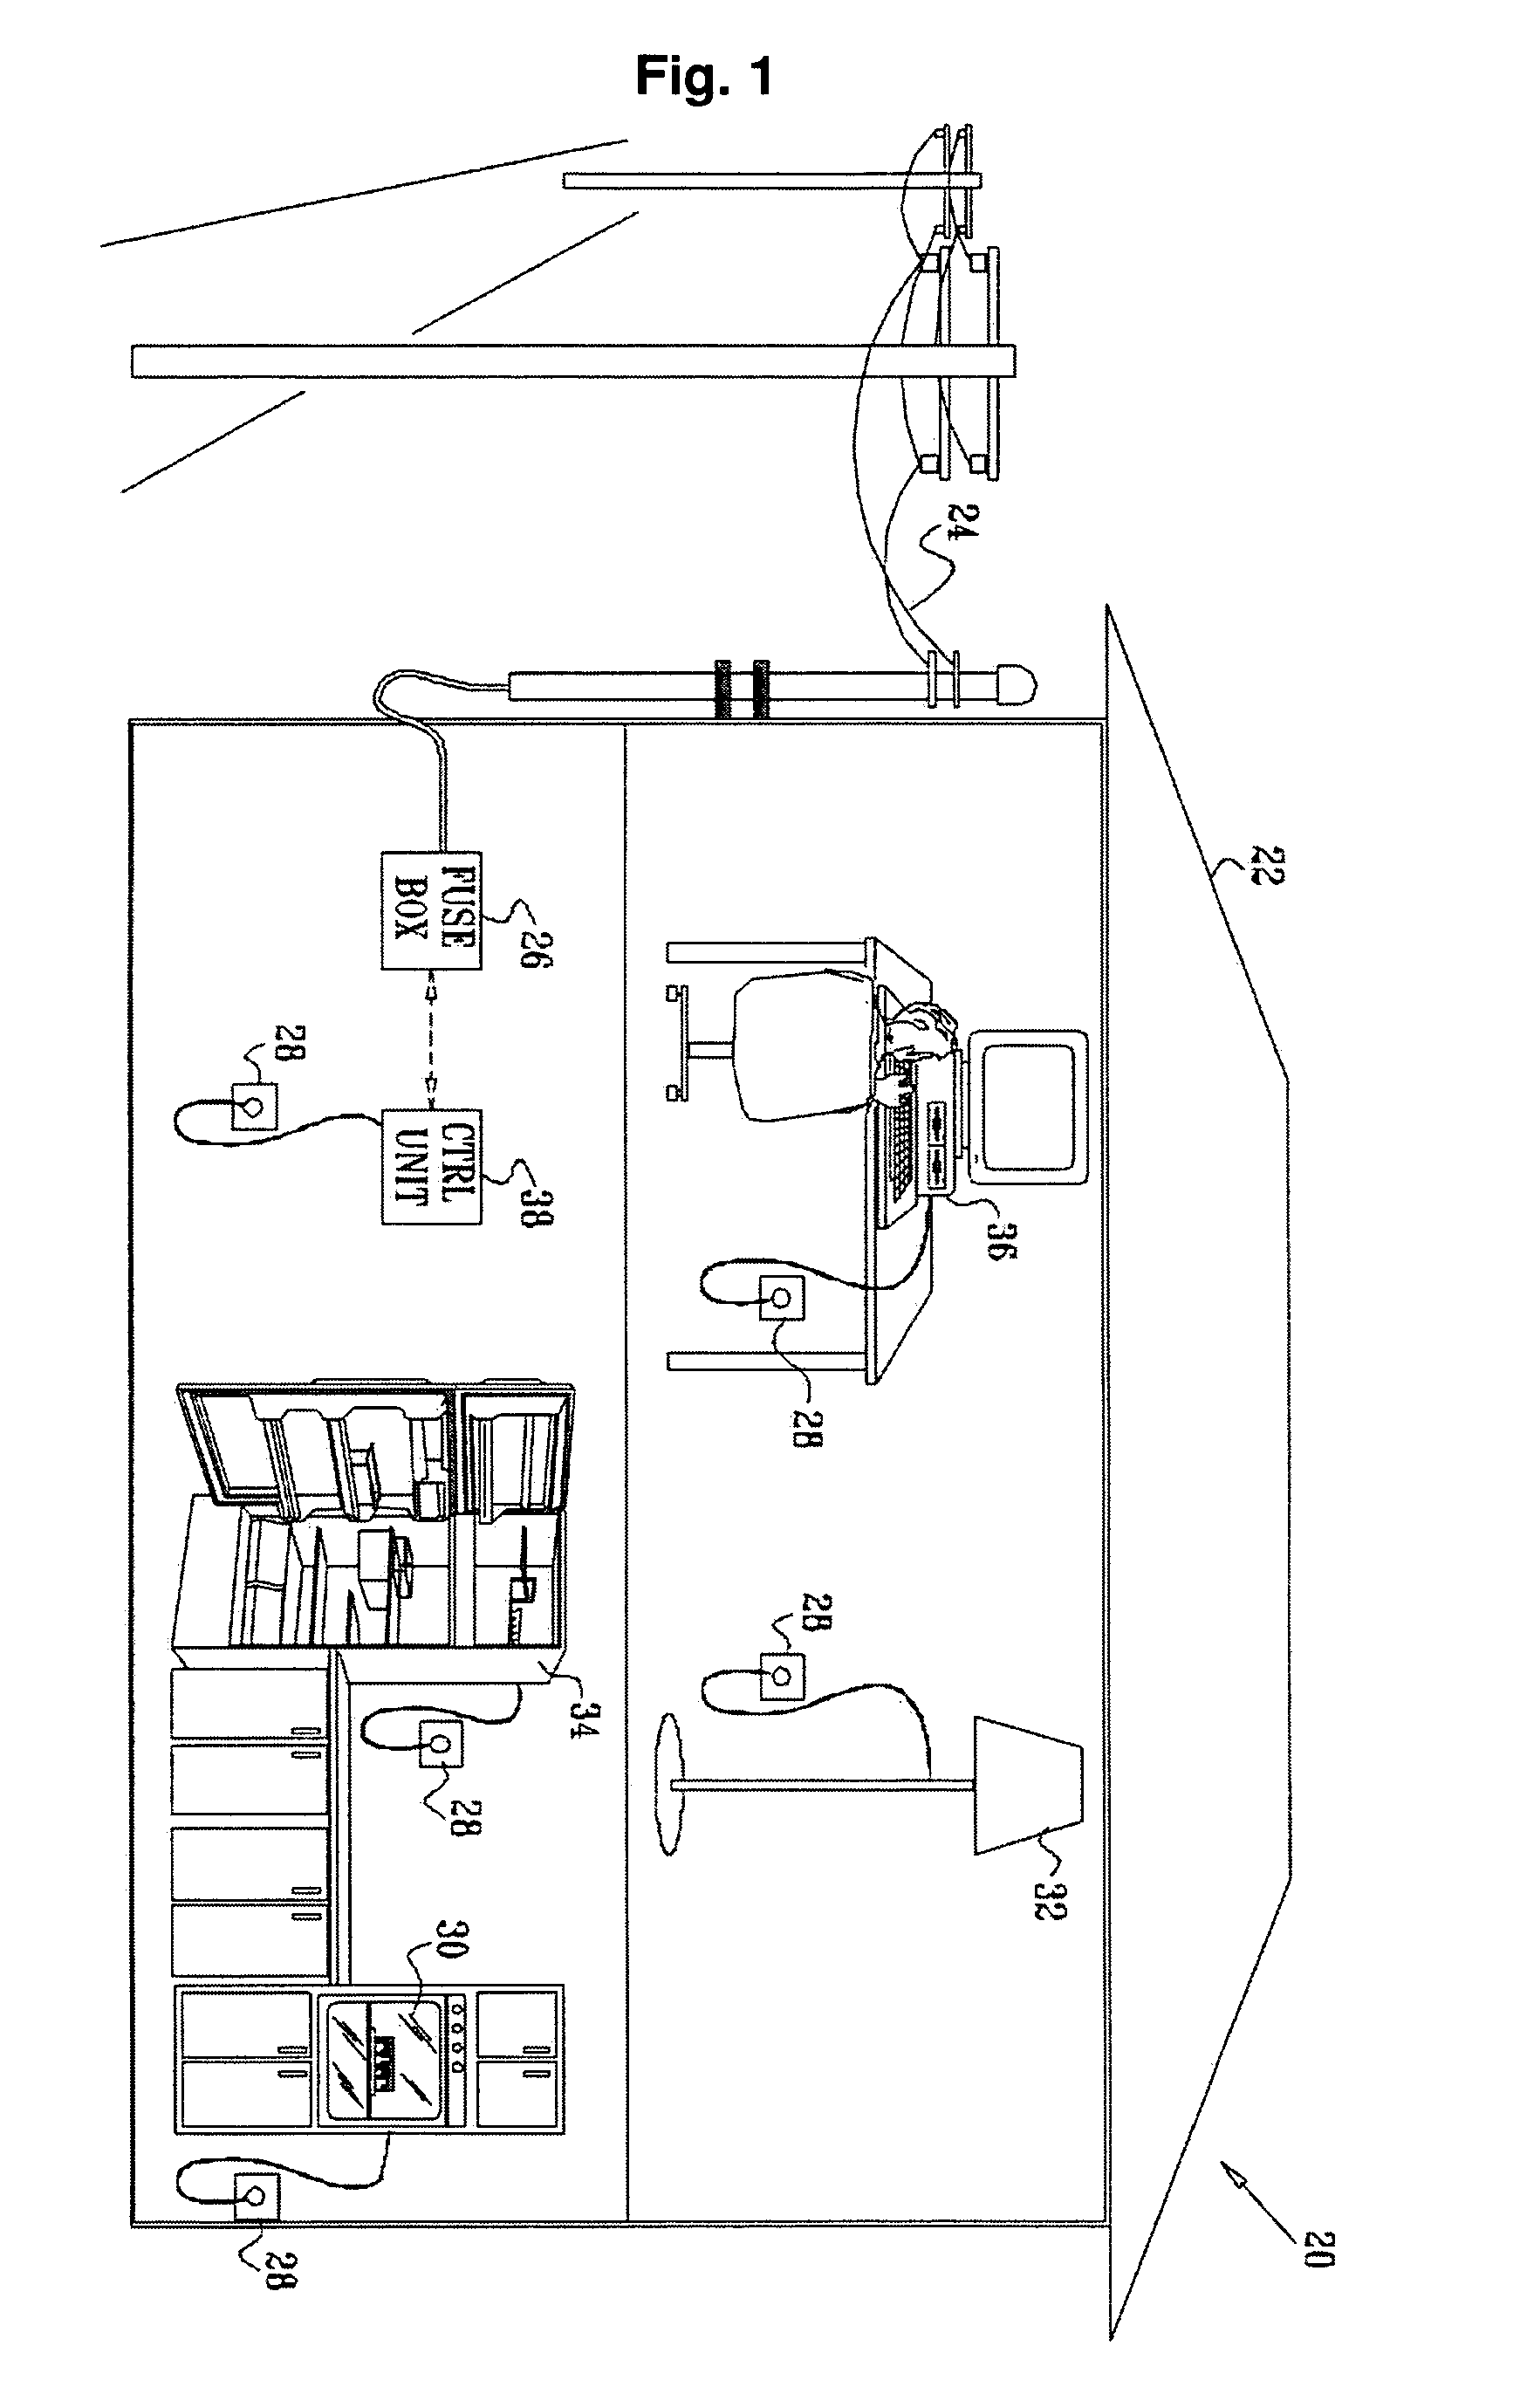 System, apparatus and method for detection of electrical faults